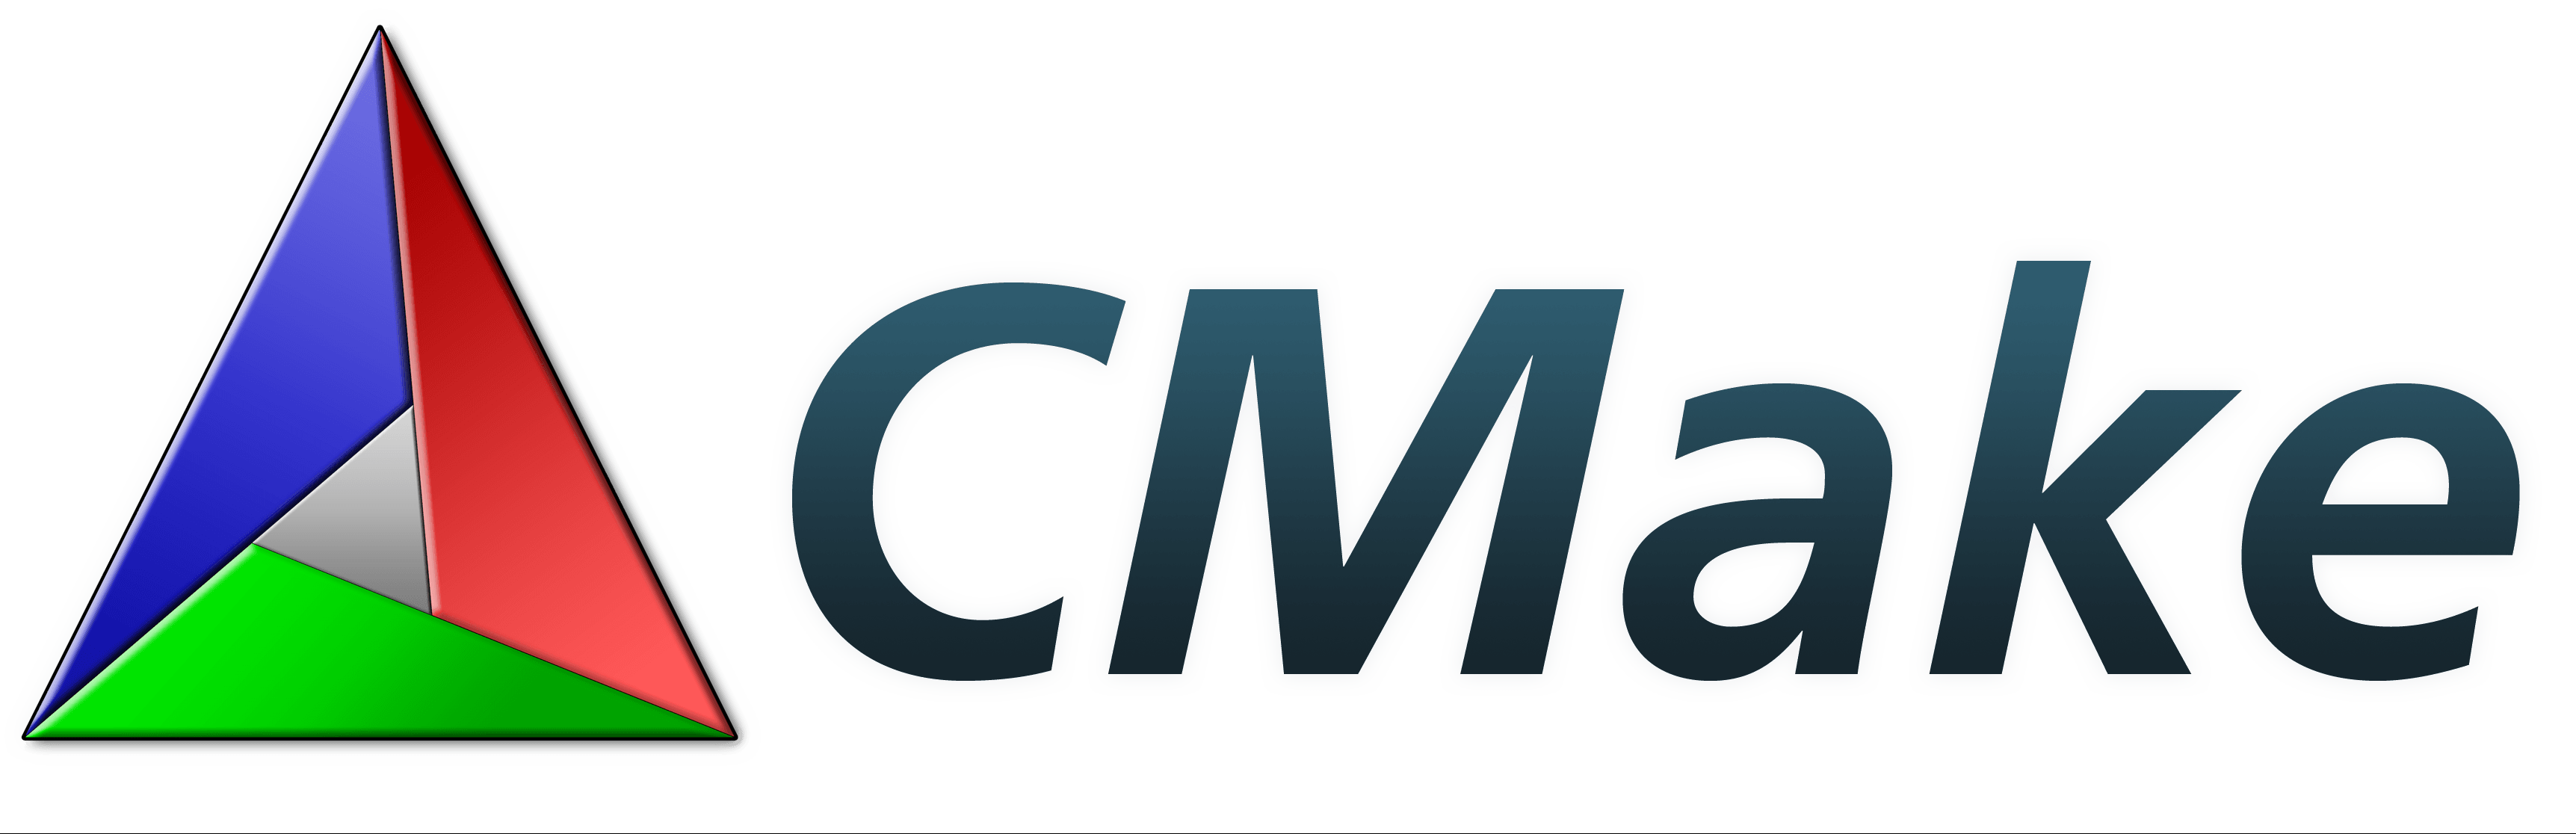 CMake Logo - Kitware Increases Android Support in CMake 3.7 - Kitware Blog